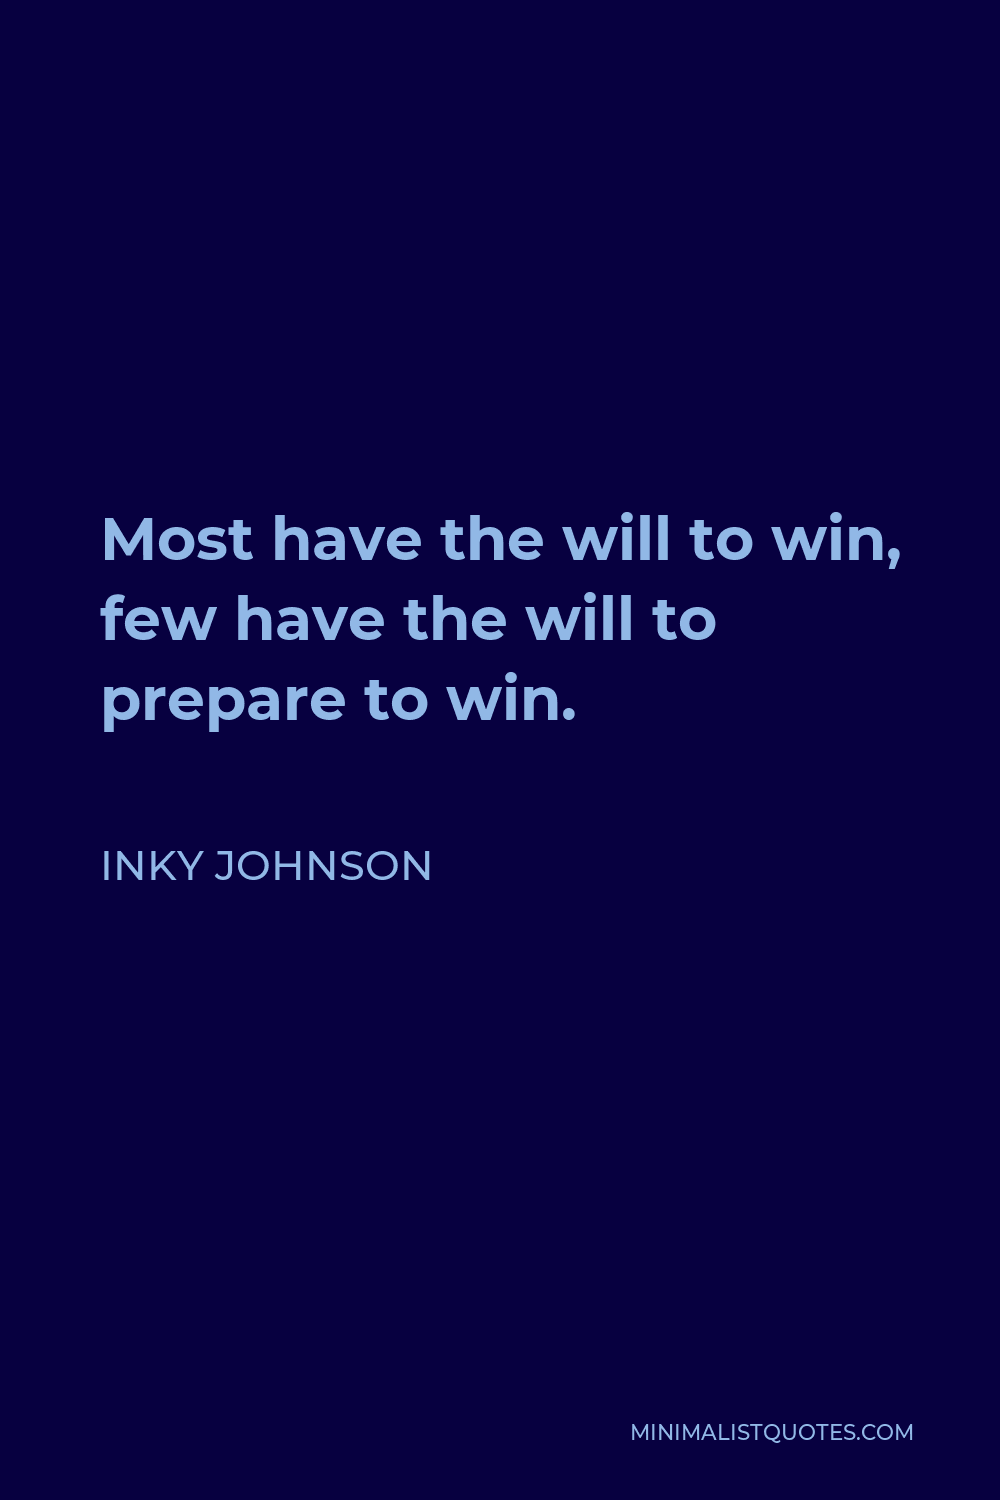 Inky Johnson Quote - Most have the will to win, few have the will to prepare to win.